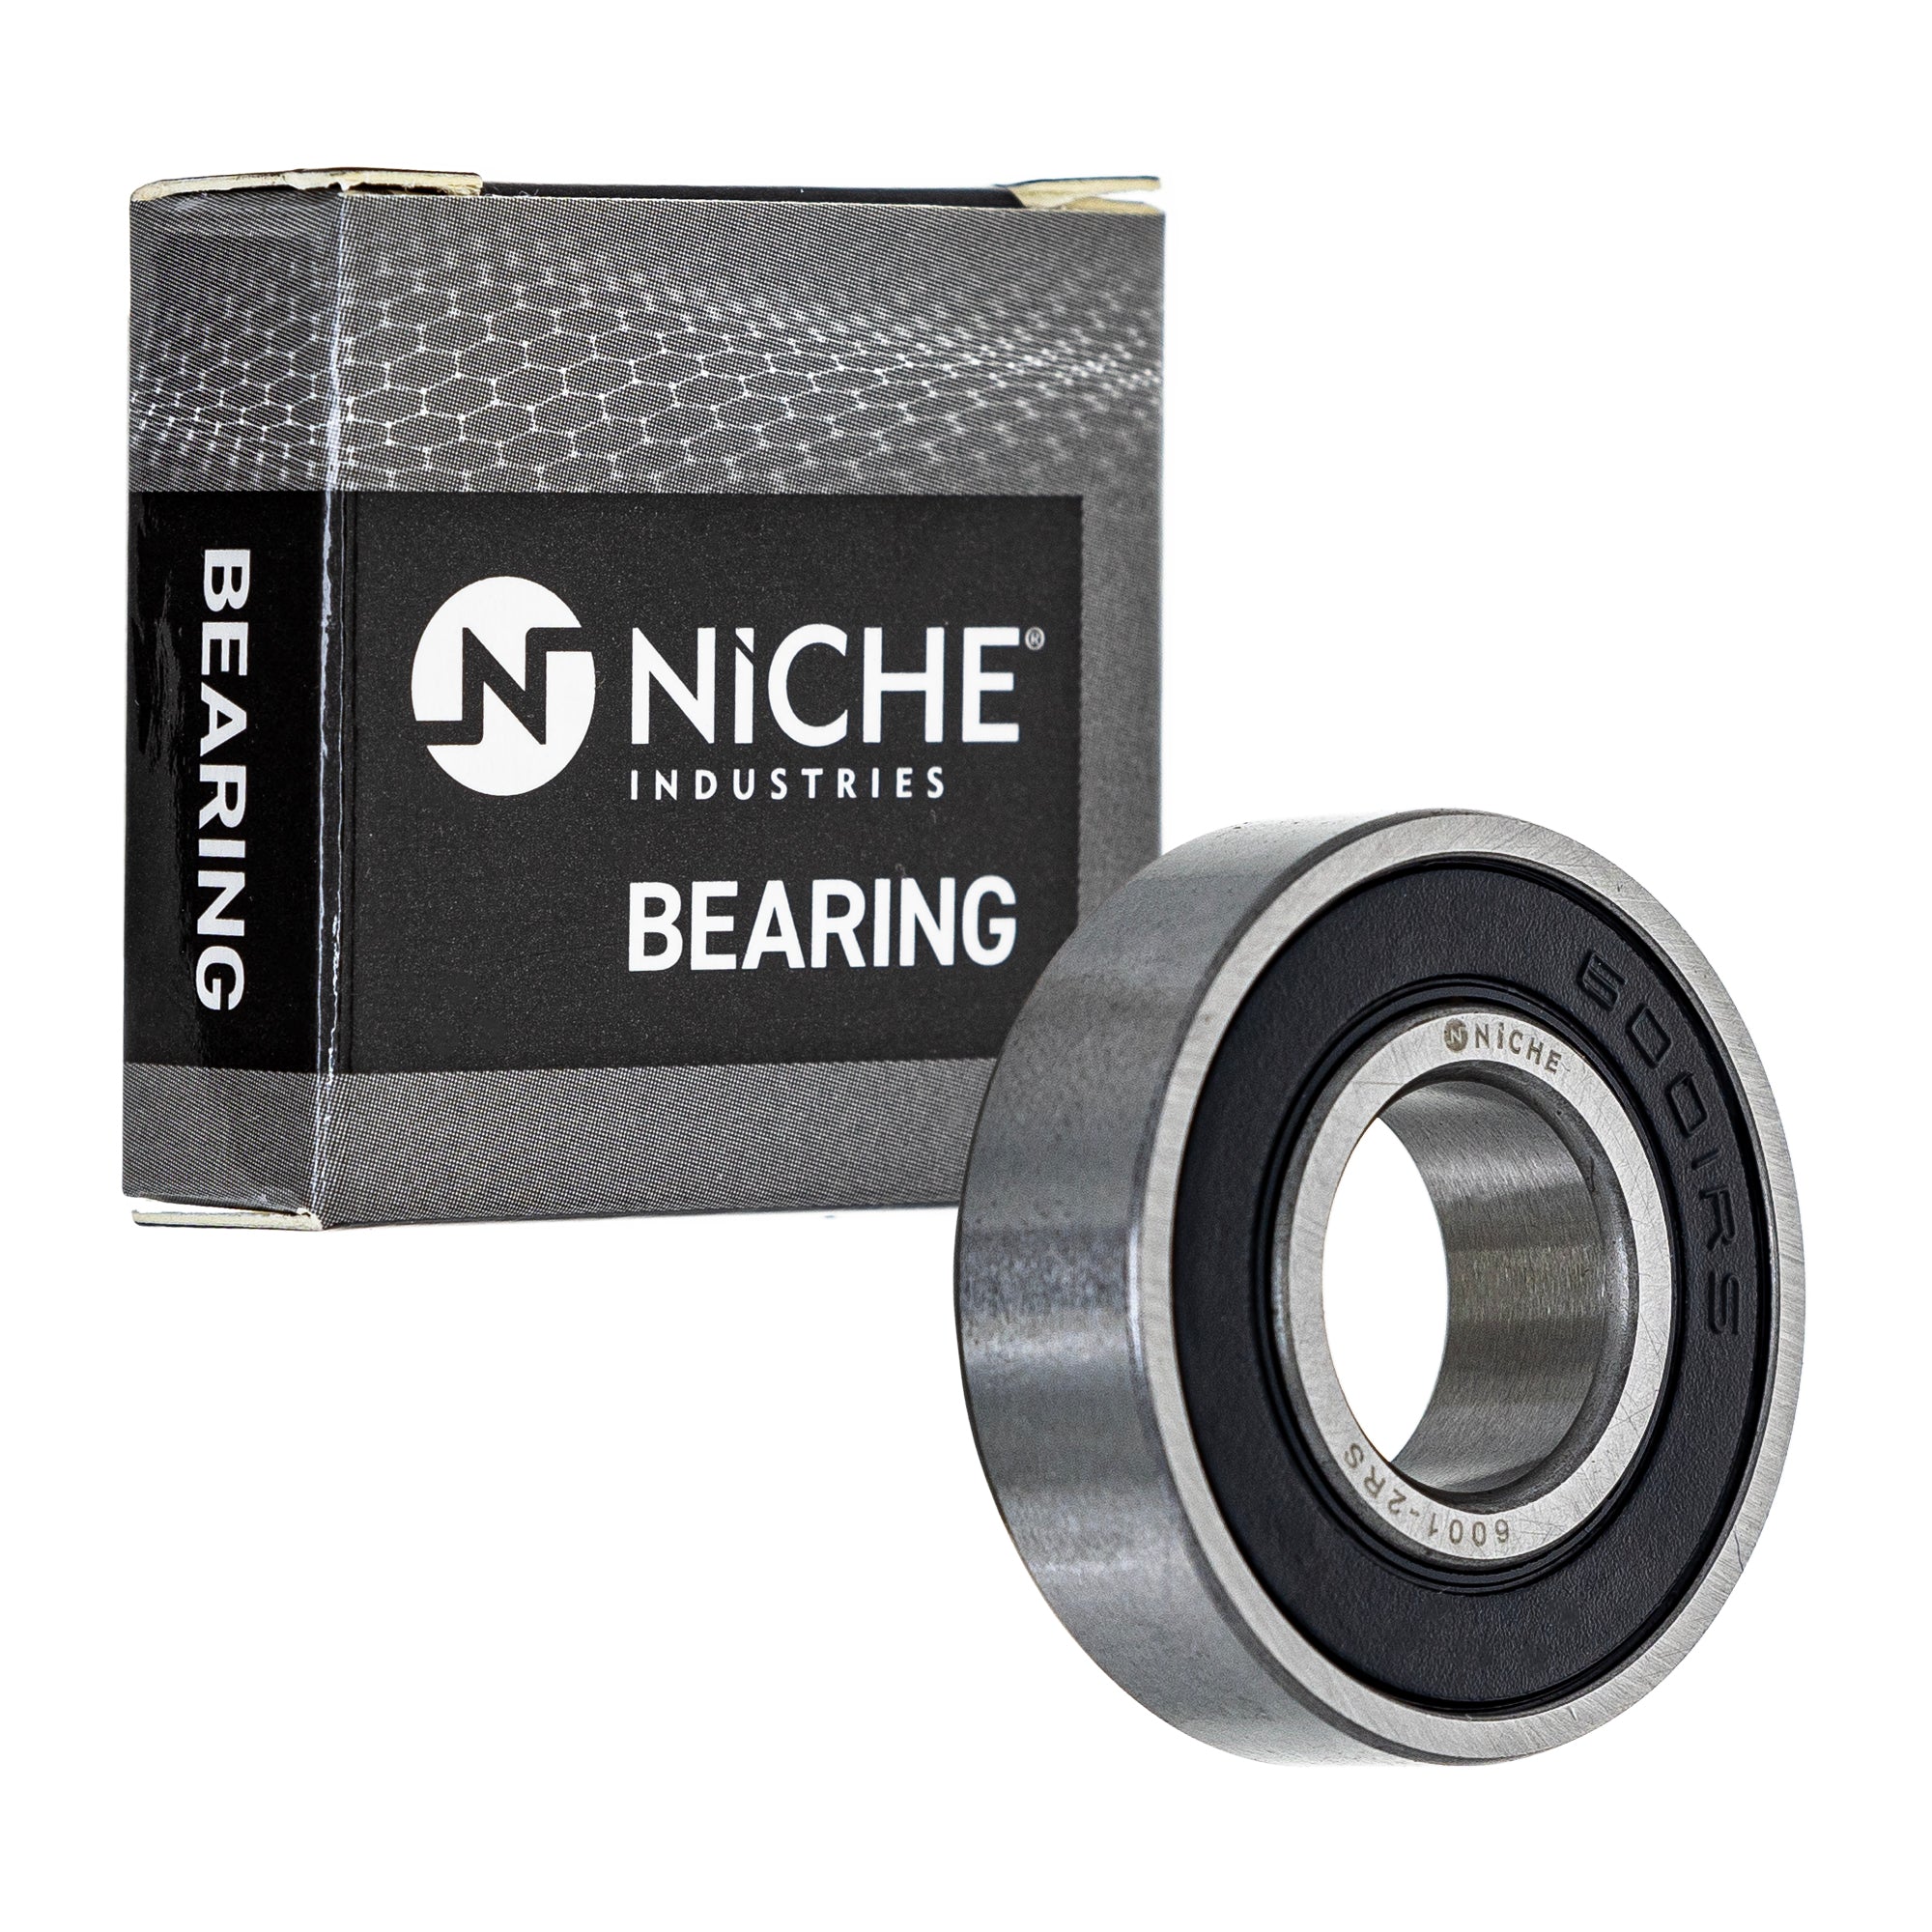 NICHE 519-CBB2257R Bearing 2-Pack for zOTHER YZ80 TTR125LE TTR125